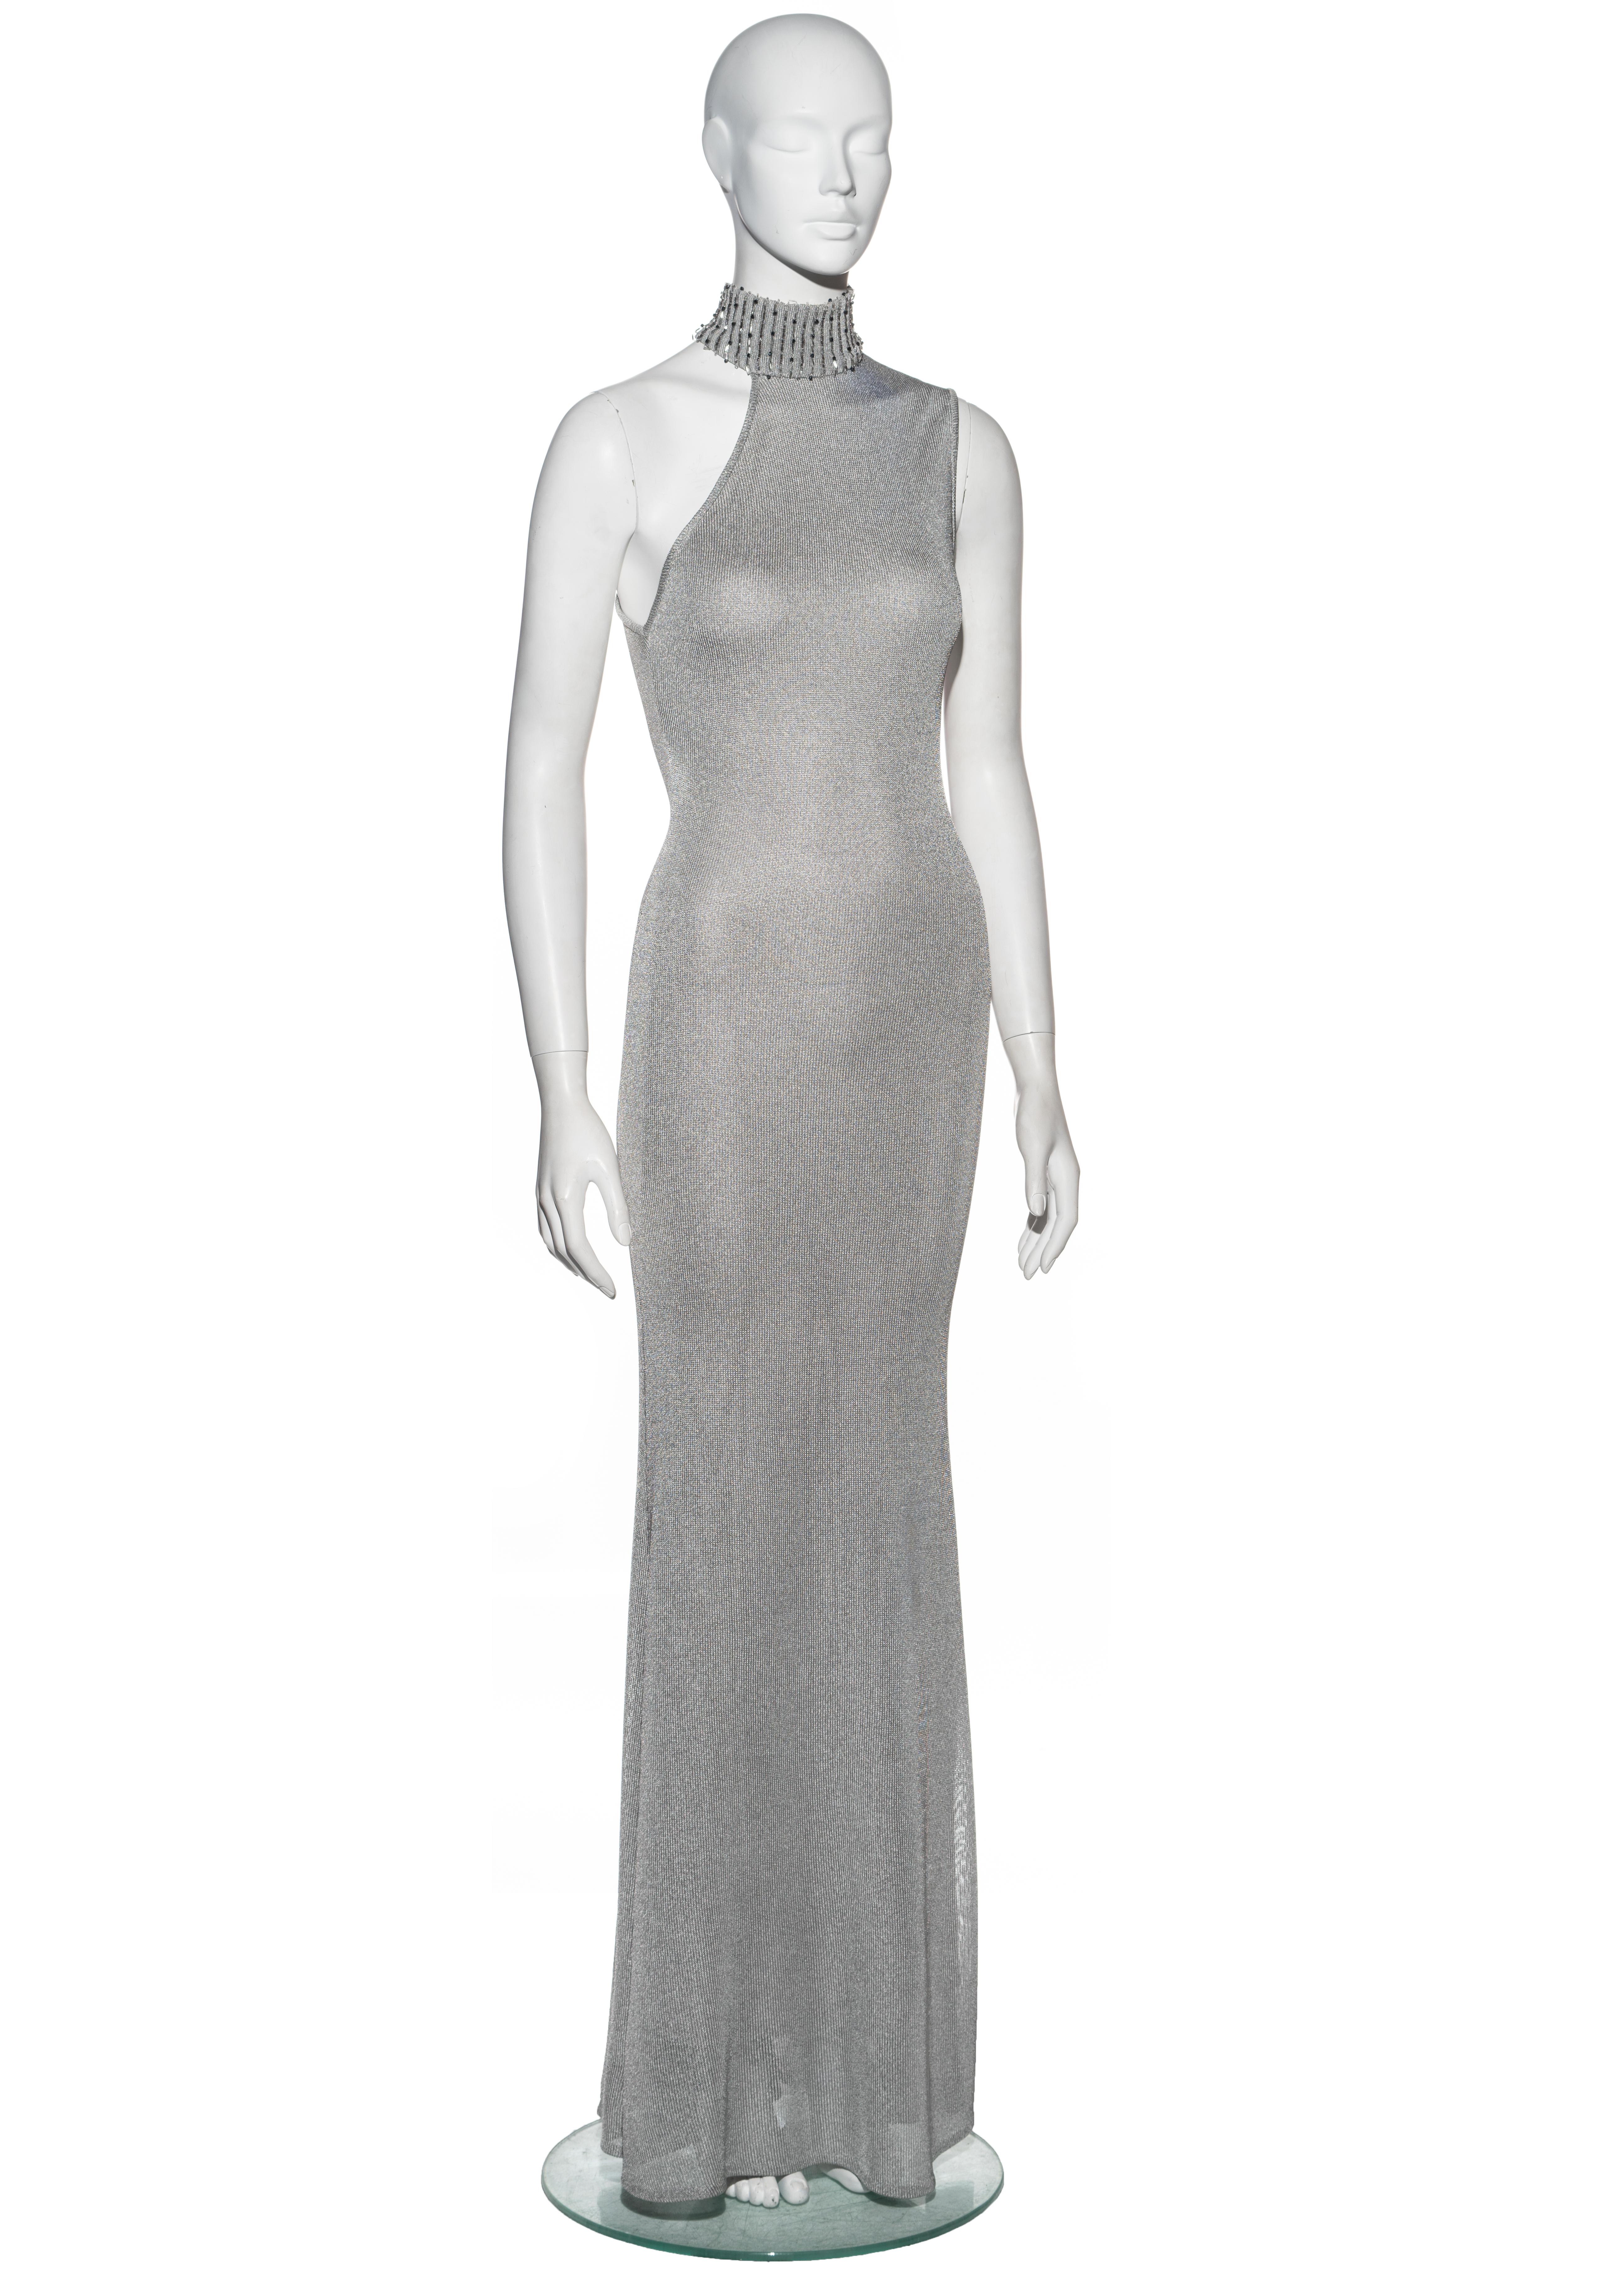 Gianni Versace silver knitted rayon evening dress, fw 1996 For Sale 1